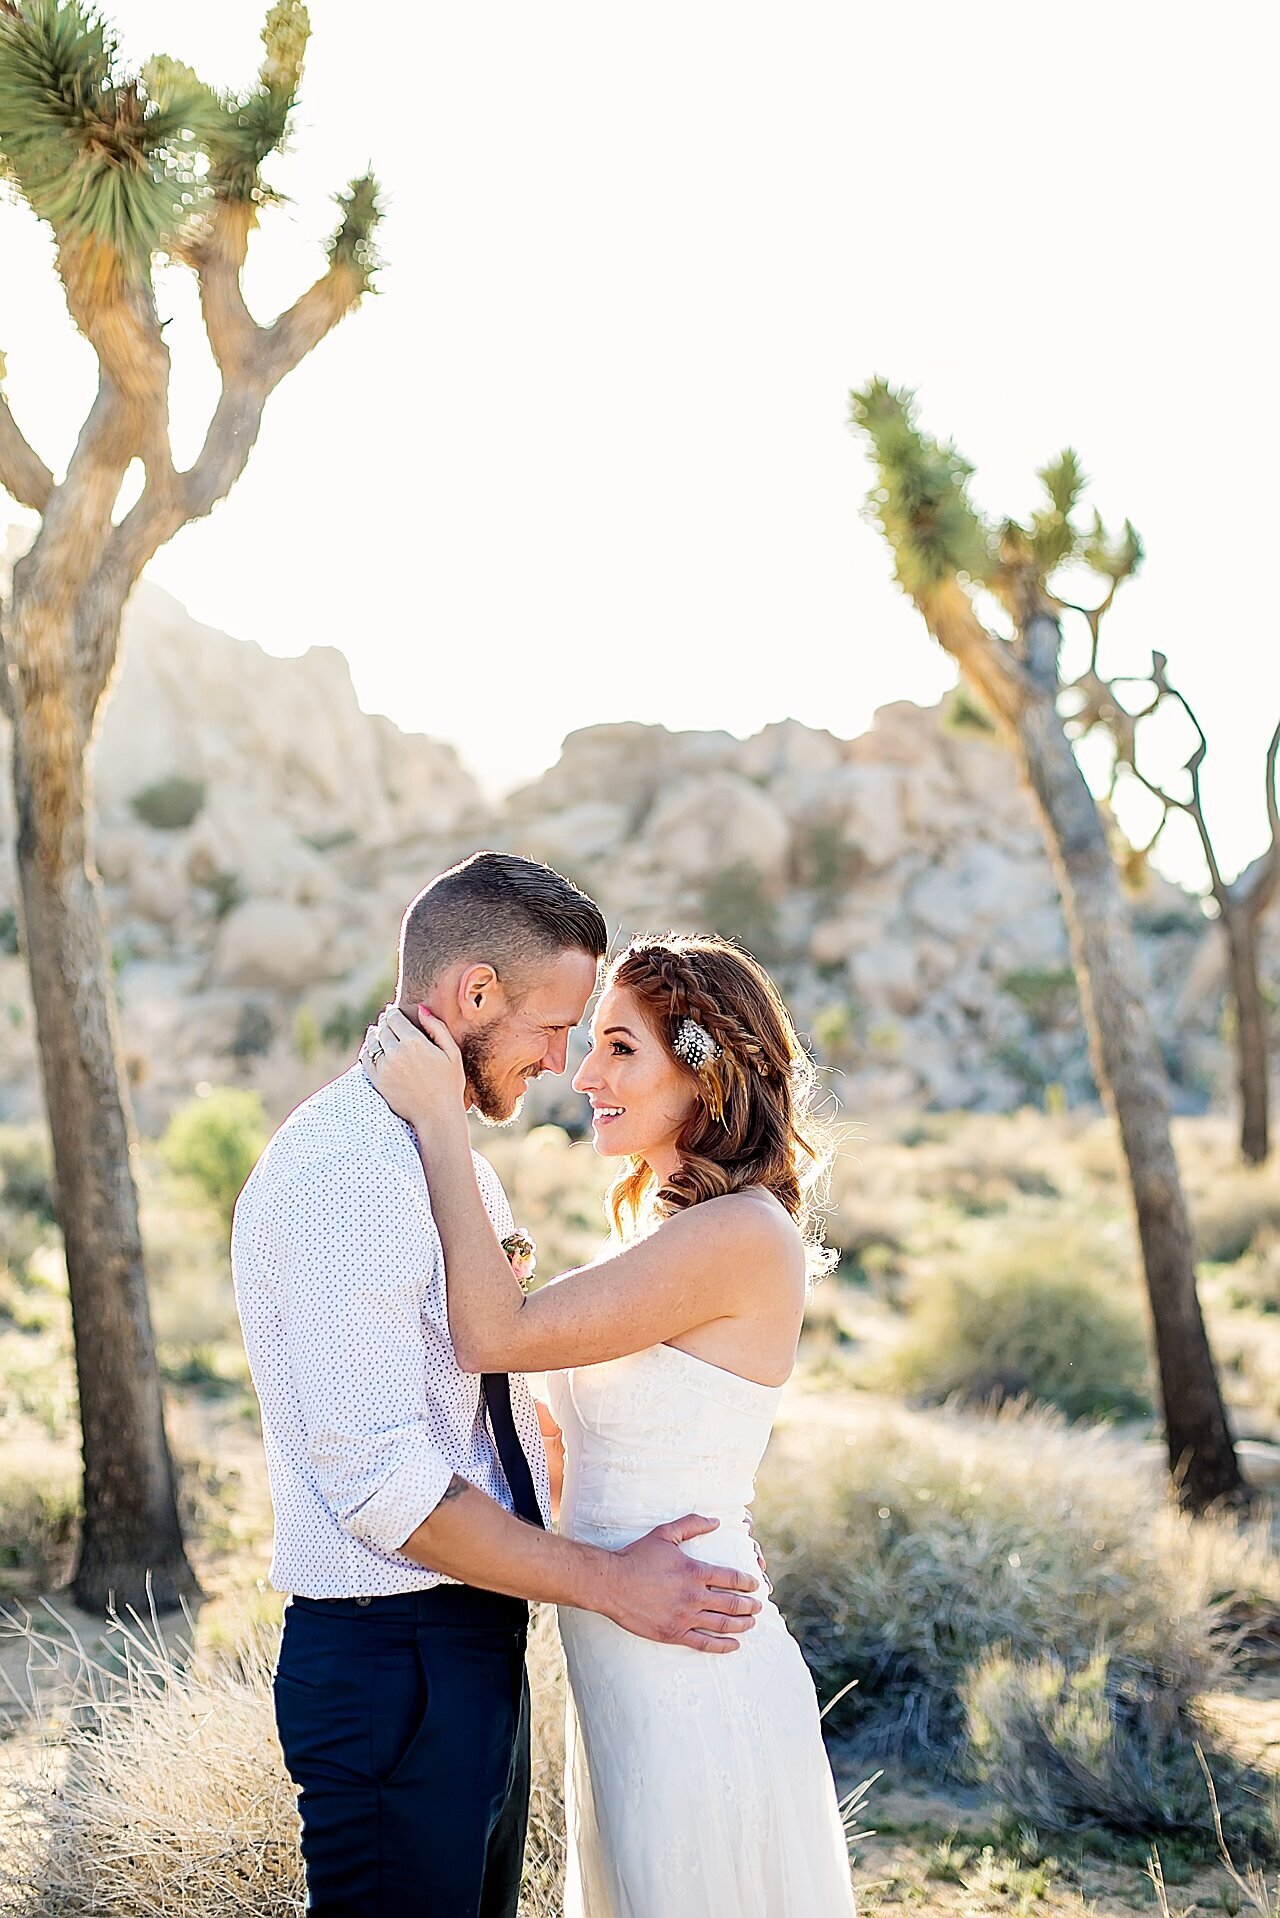 MIchelle Peterson Photography Redlands California wedding and portrait photographer_1106